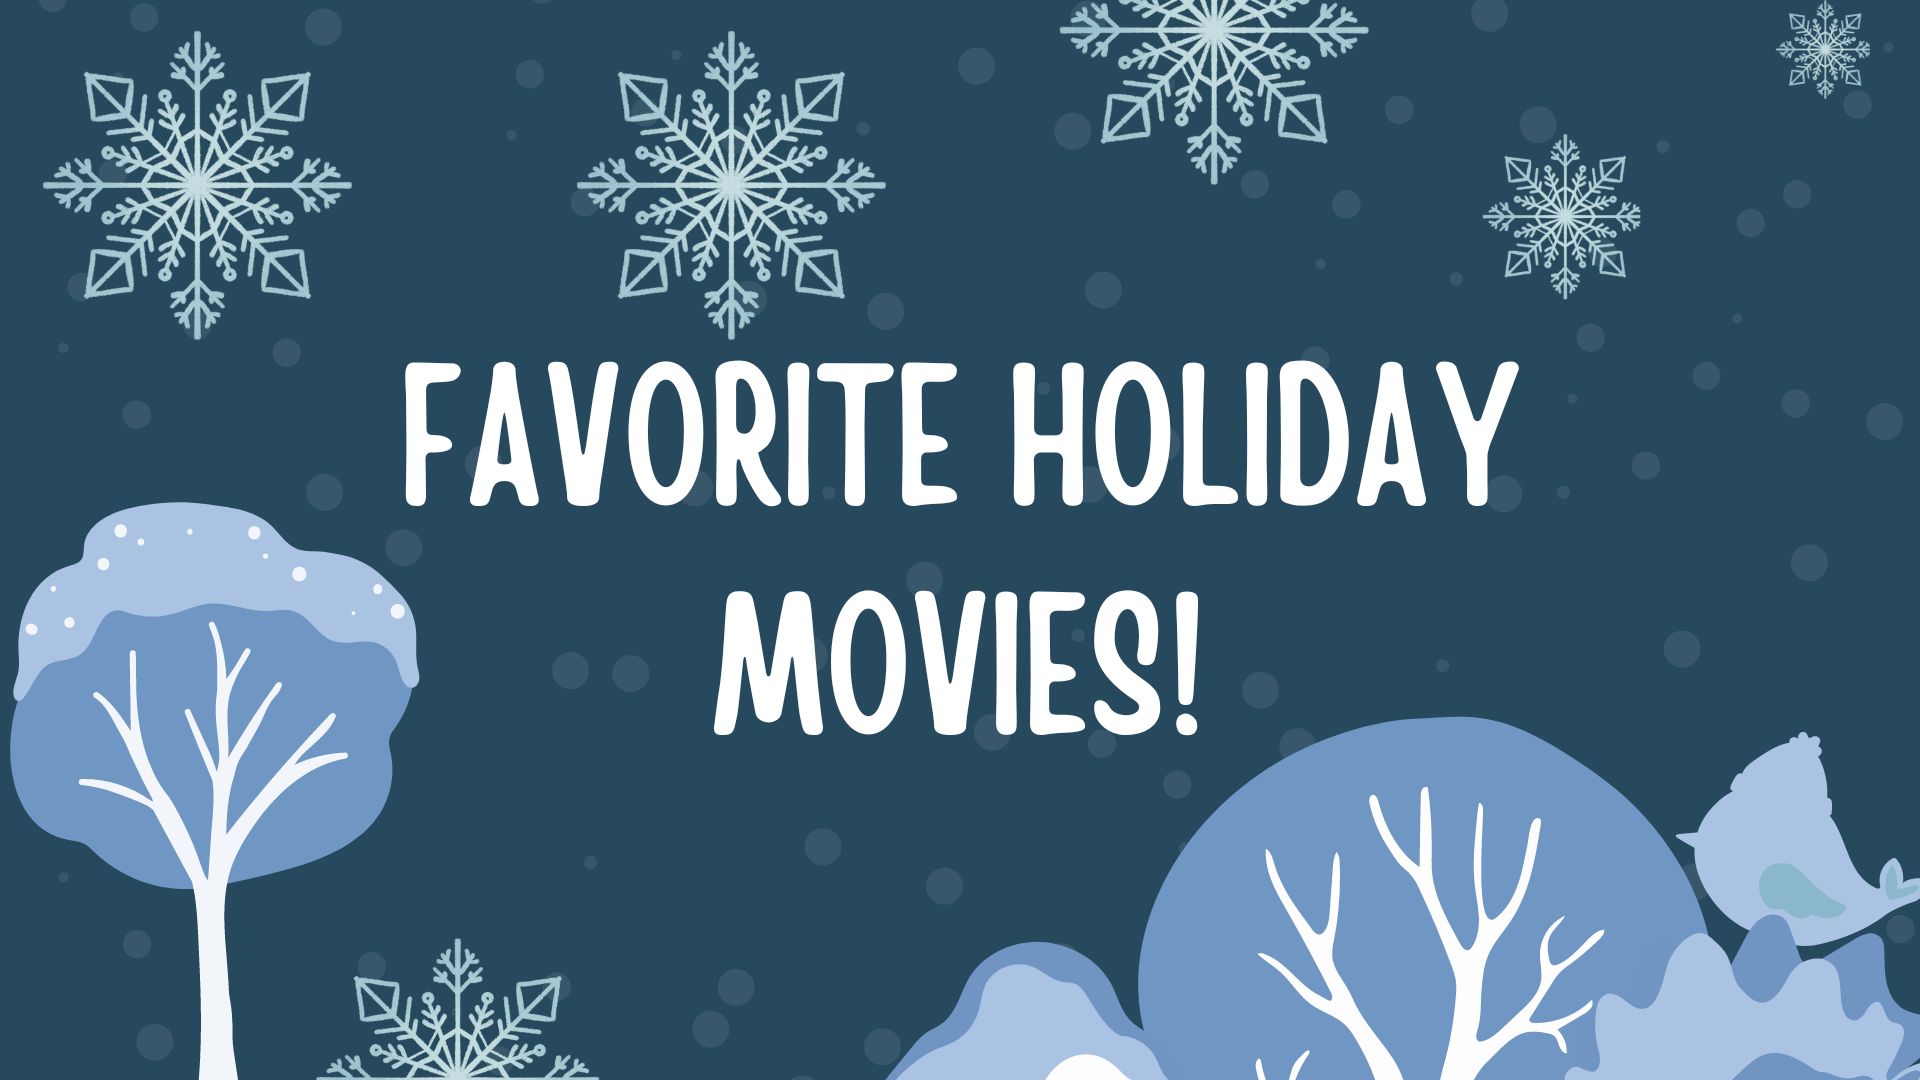 See what MECA students voted as their favorite holiday movie!